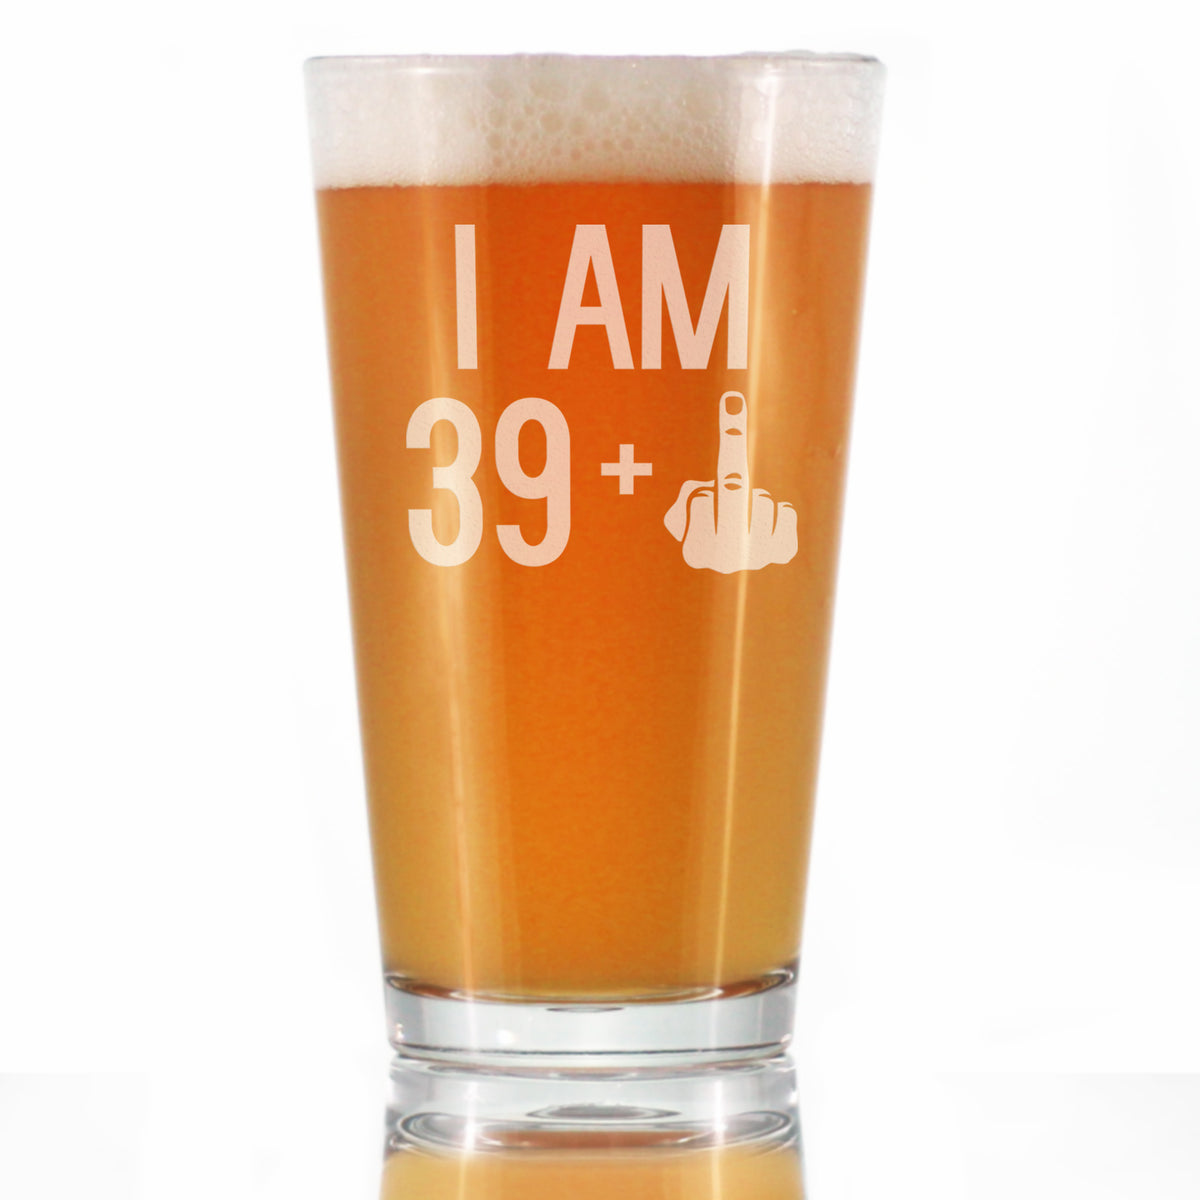 39 + 1 Middle Finger - 16 oz Pint Glass for Beer - Funny 40th Birthday Gifts for Men and Women Turning 40